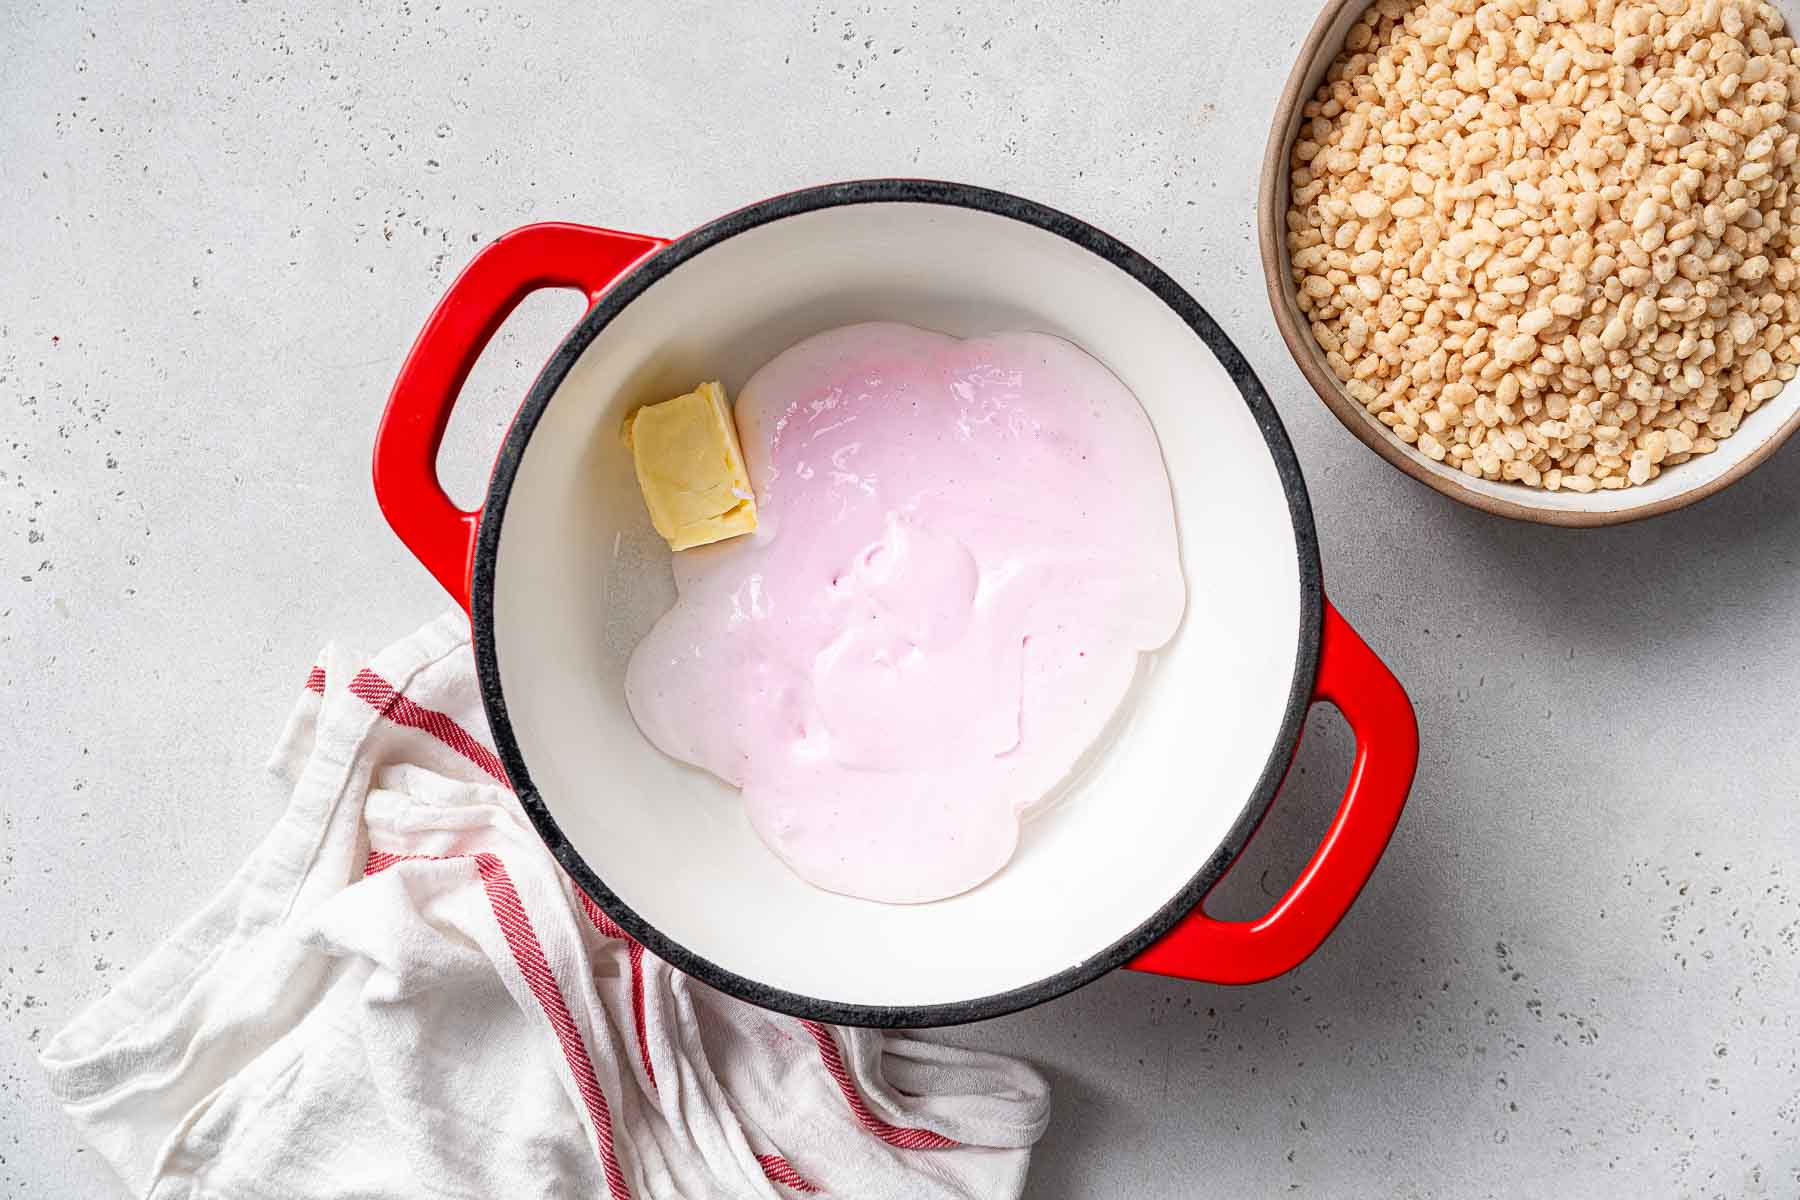 Pink melted marshmallows and butter in a red saucepan.